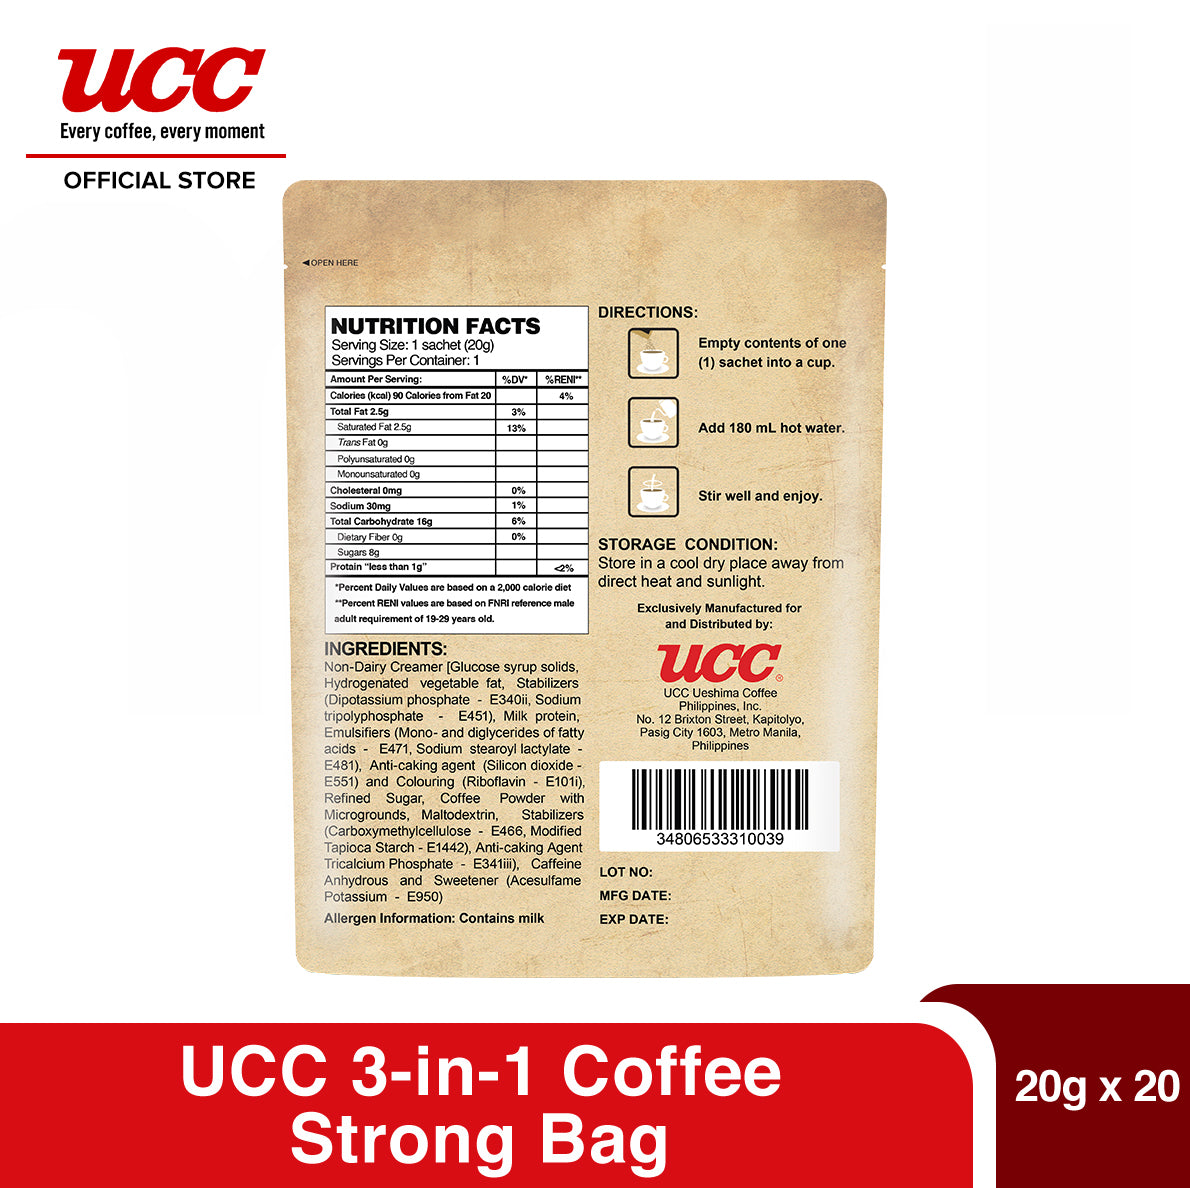 UCC 3-in-1 Coffee Strong Bag (20g x 20)